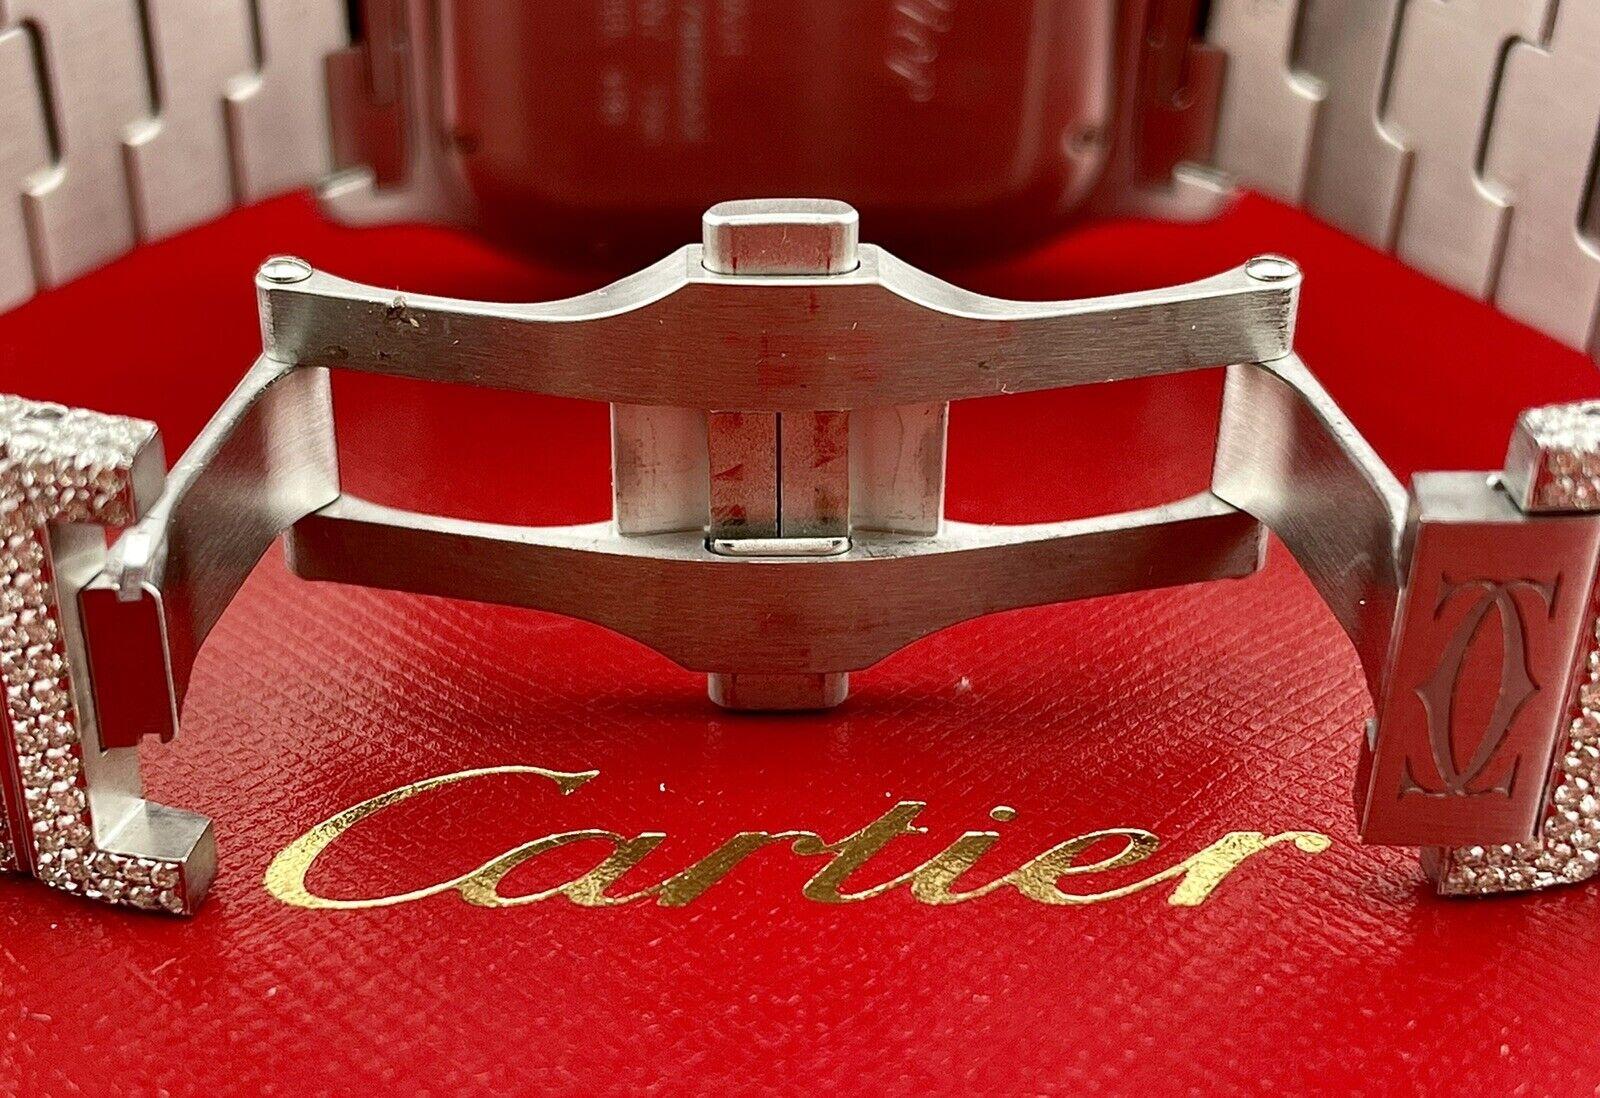 Cartier Santos 45mm Watch. A New Watch w/ Gift box. Watch is 100% Authentic and Comes with Authenticity Card. Watch Reference is W2SA0008 and is in Excellent Condition (See Pictures). The Dial color is Gold, and the Material is Gold and Stainless